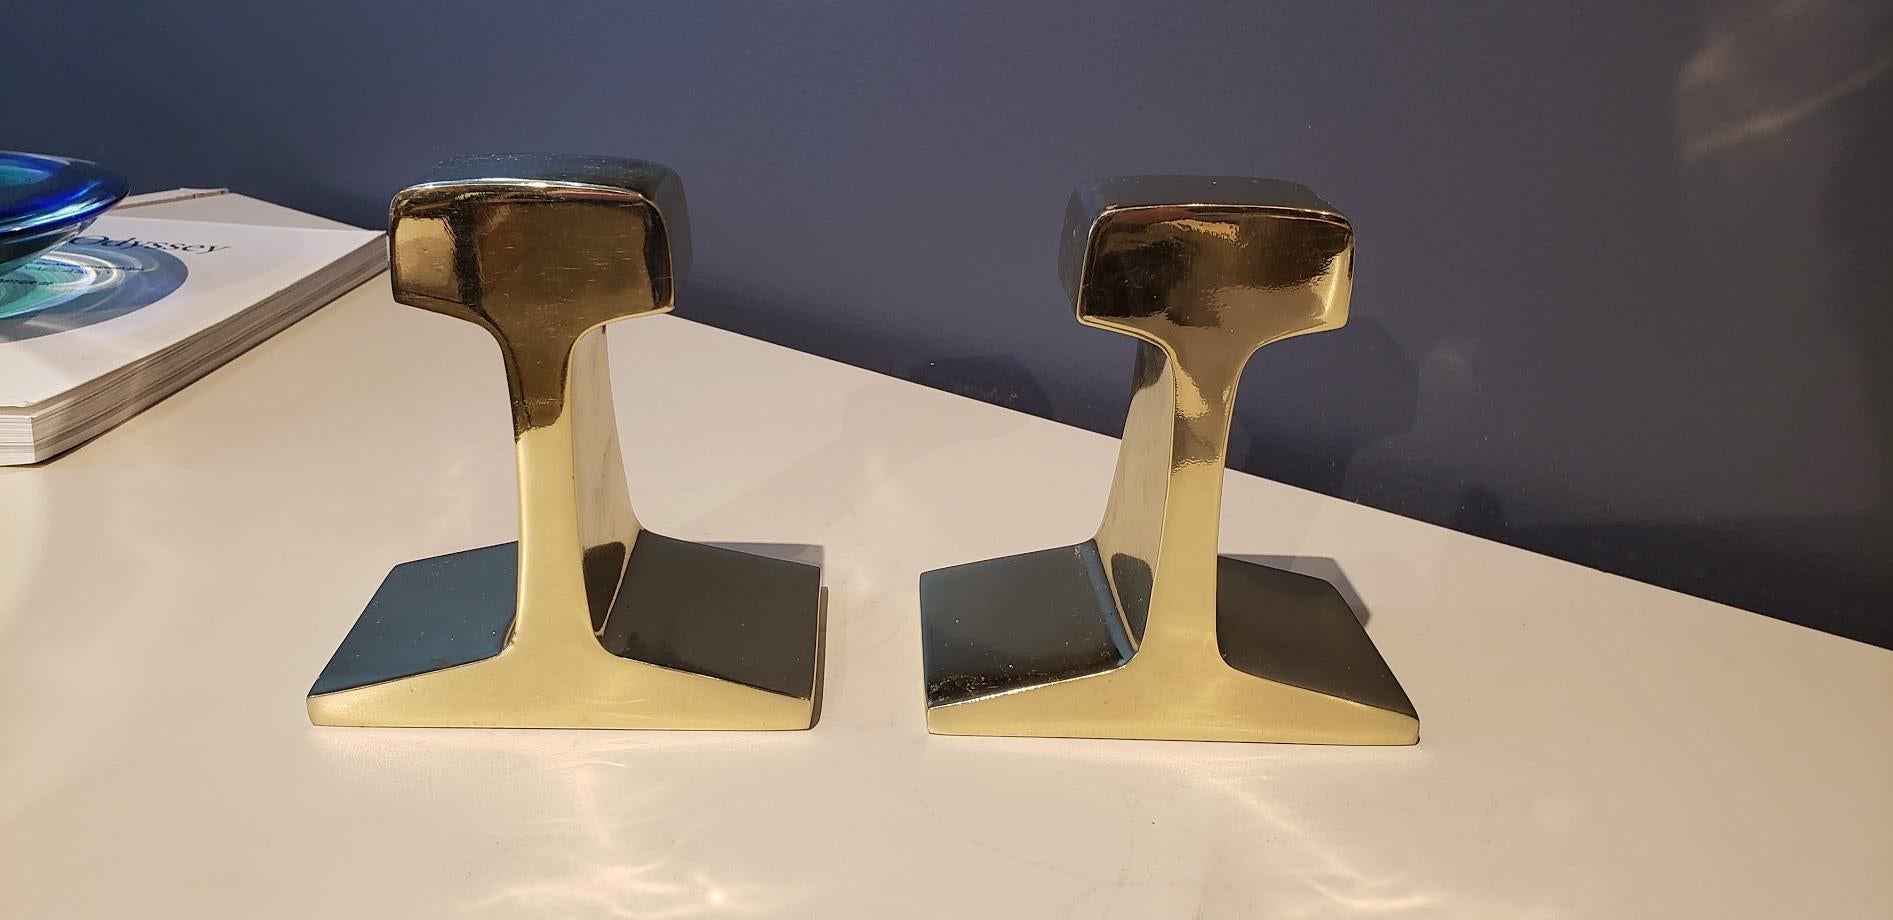 Vintage Railroad Tie Bookends, Restored in Mirror-Polished Brass 3